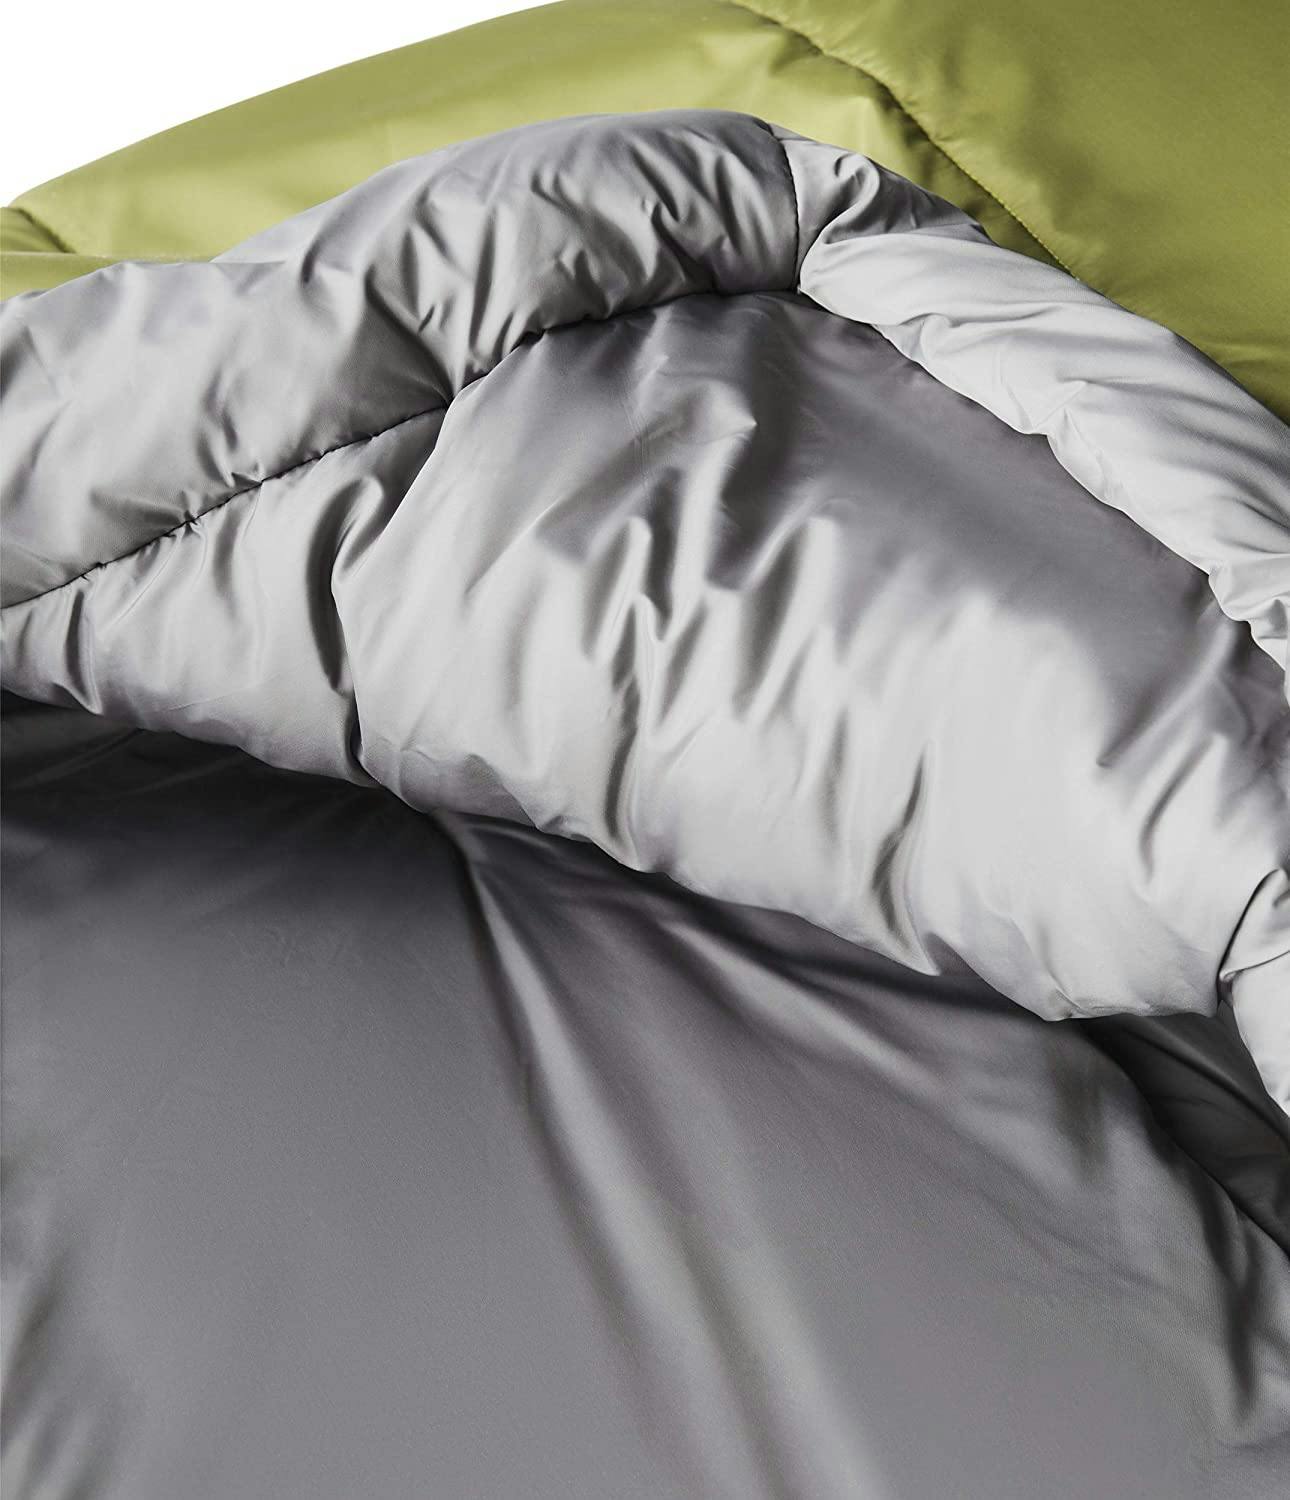 The North Face Wasatch 0° Sleeping Bag - Men's